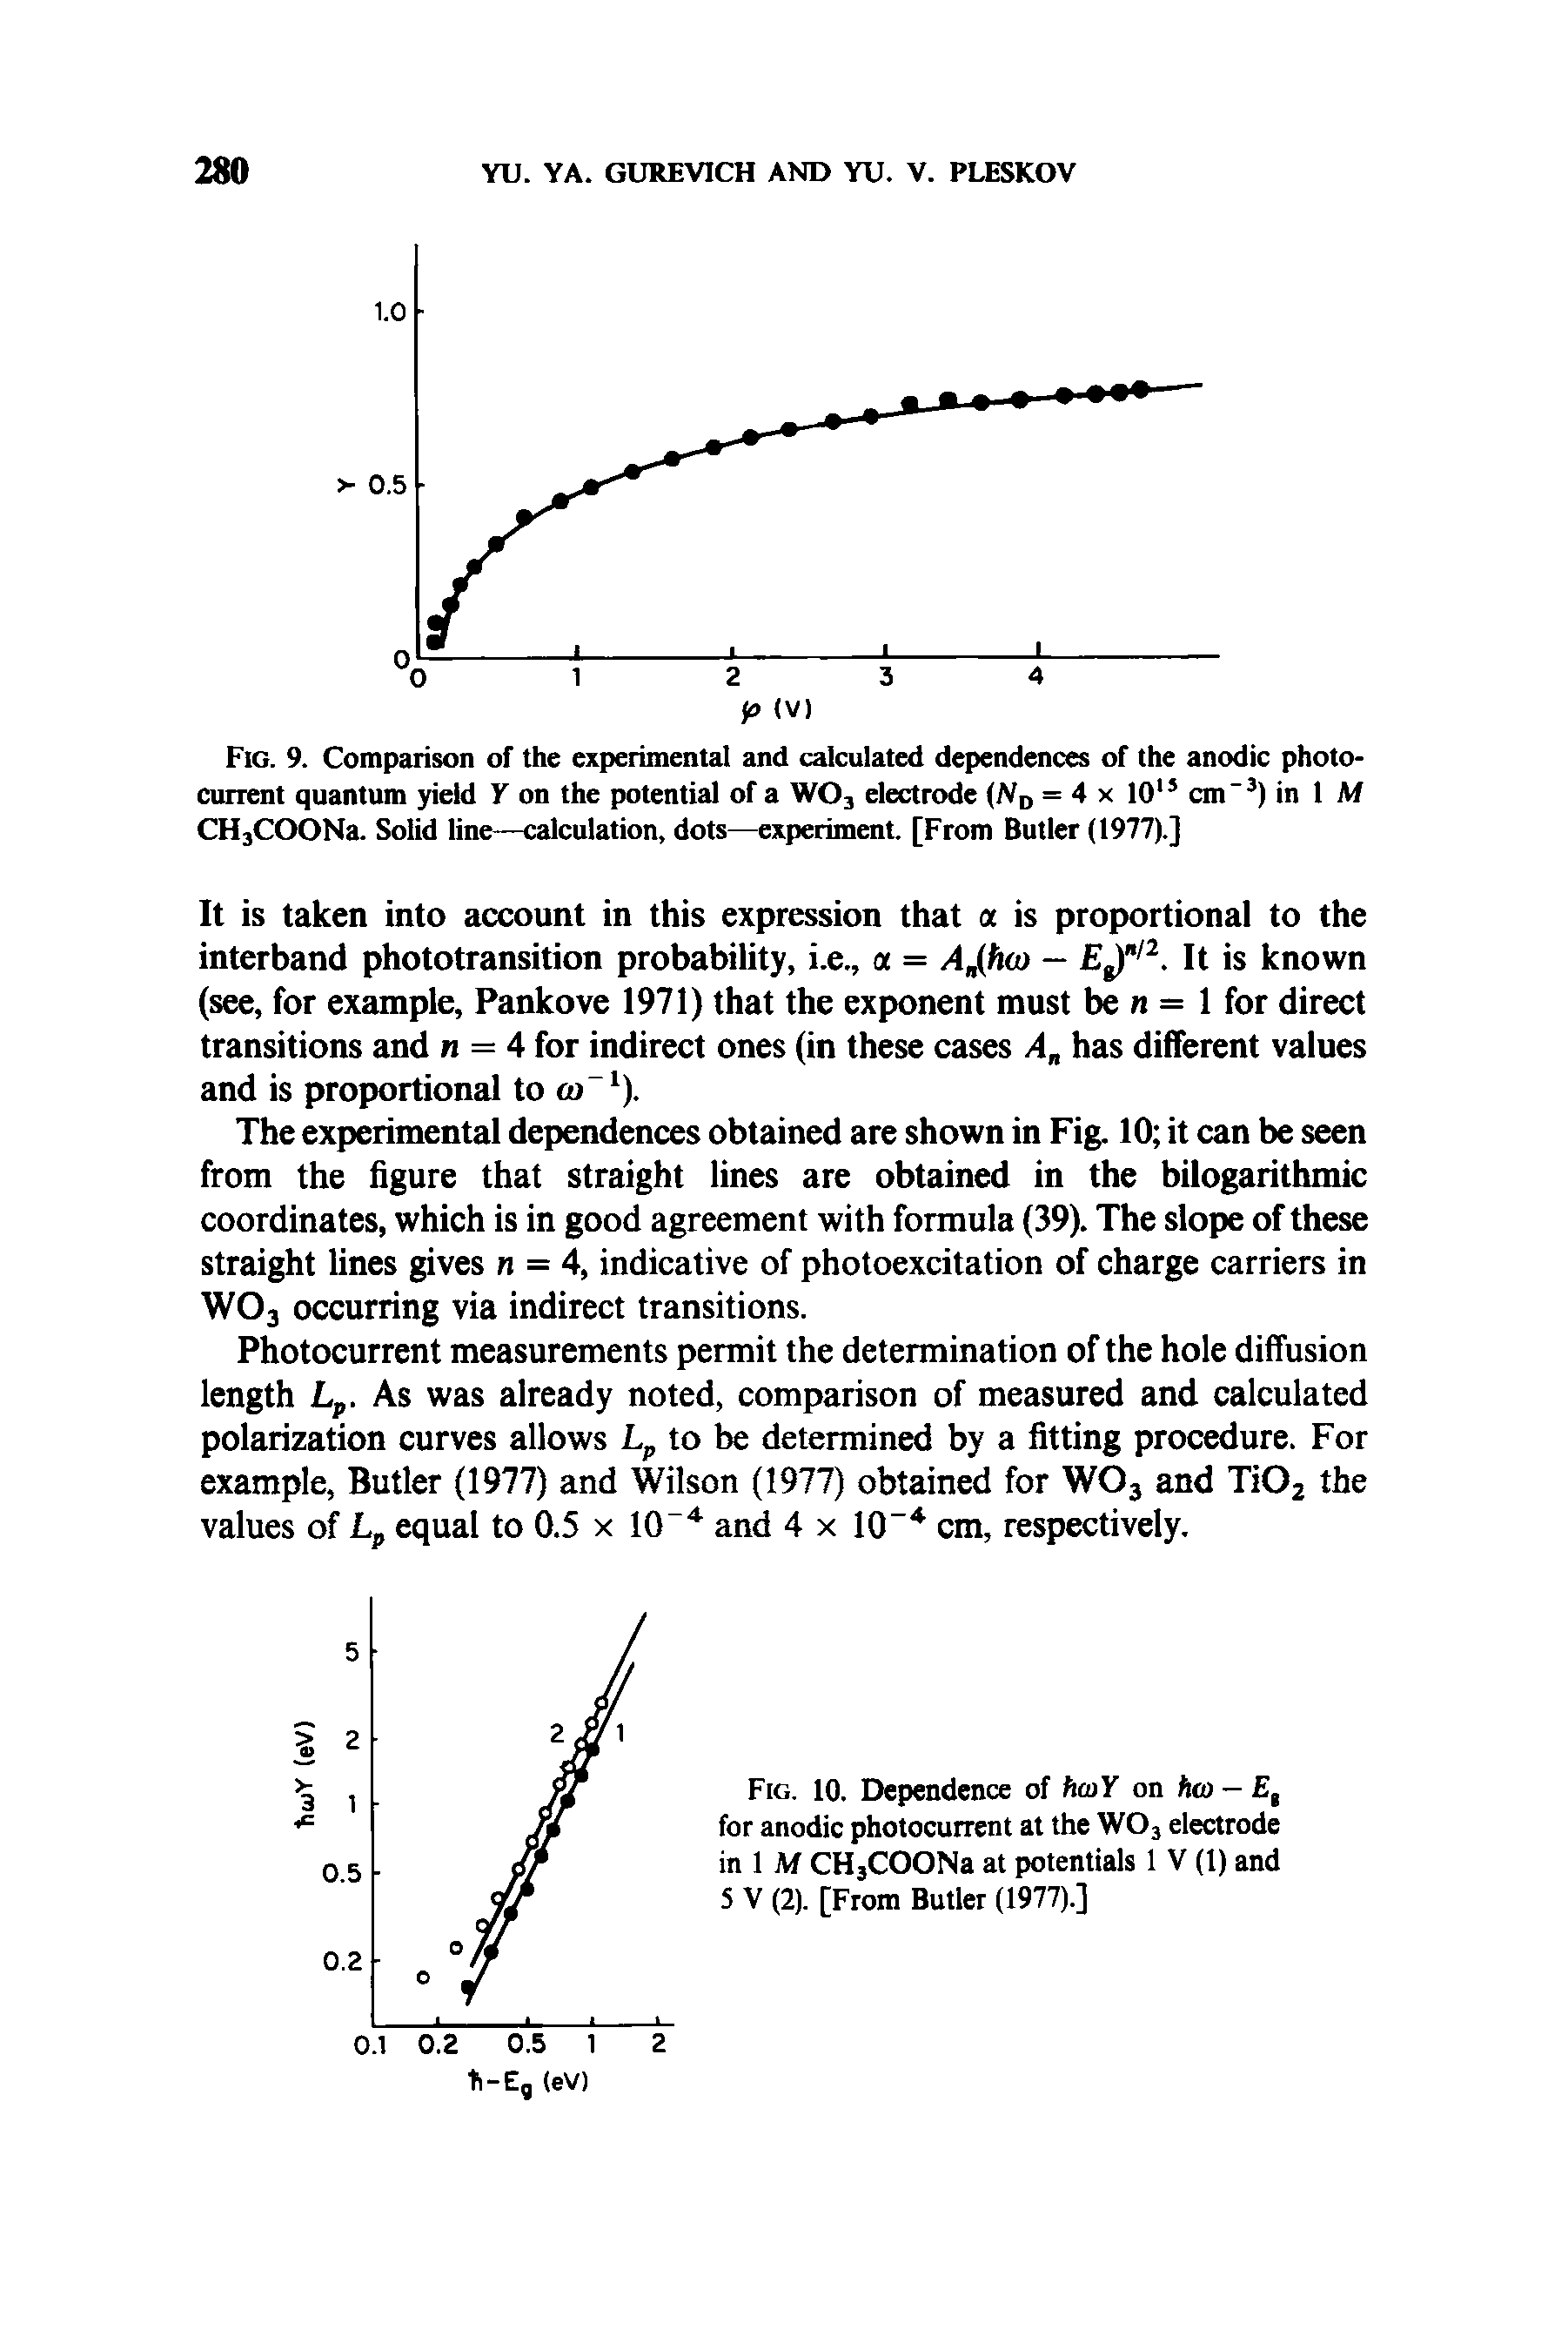 Fig. 9. Comparison of the experimental and calculated dependences of the anodic photo-cunent quantum yield Y on the potential of a W03 electrode (ND = 4 x 1015 cm"3) in 1 M CH3COONa. Solid line—calculation, dots—experiment. [From Butler (1977).]...